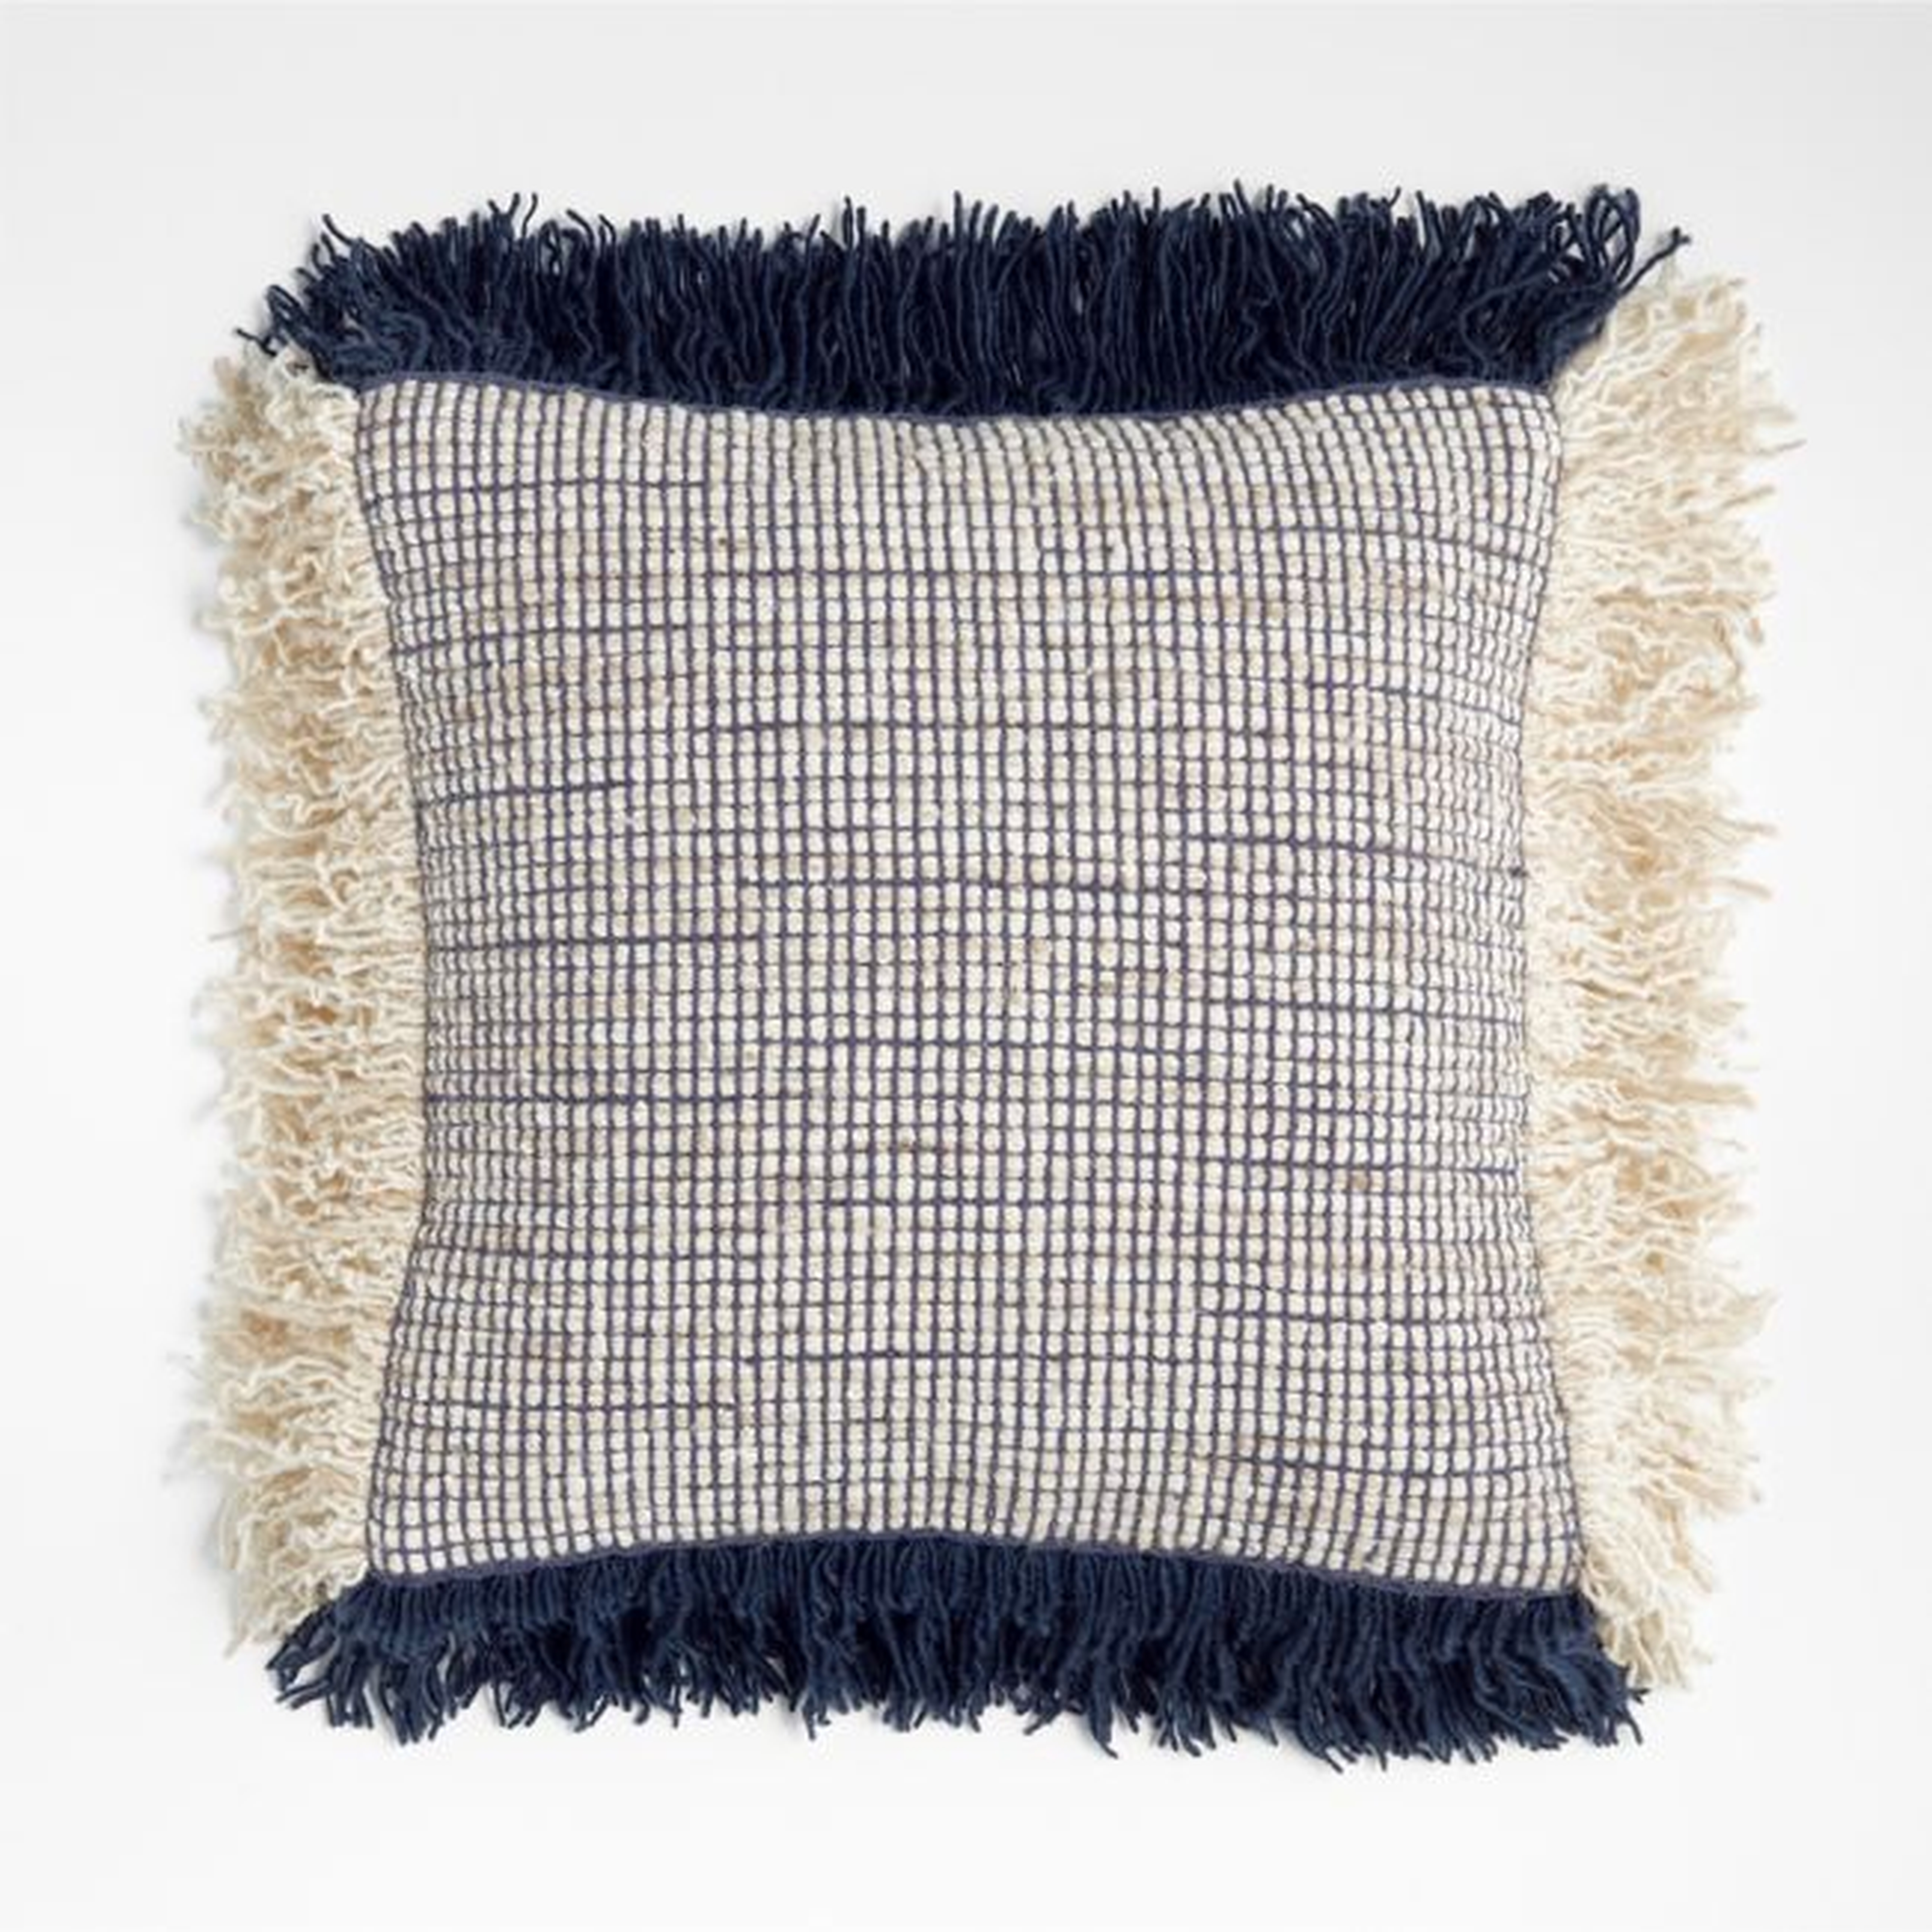 Guthrie 18"x18" Navy Fringe Throw Pillow with Down-Alternative Insert - Crate and Barrel